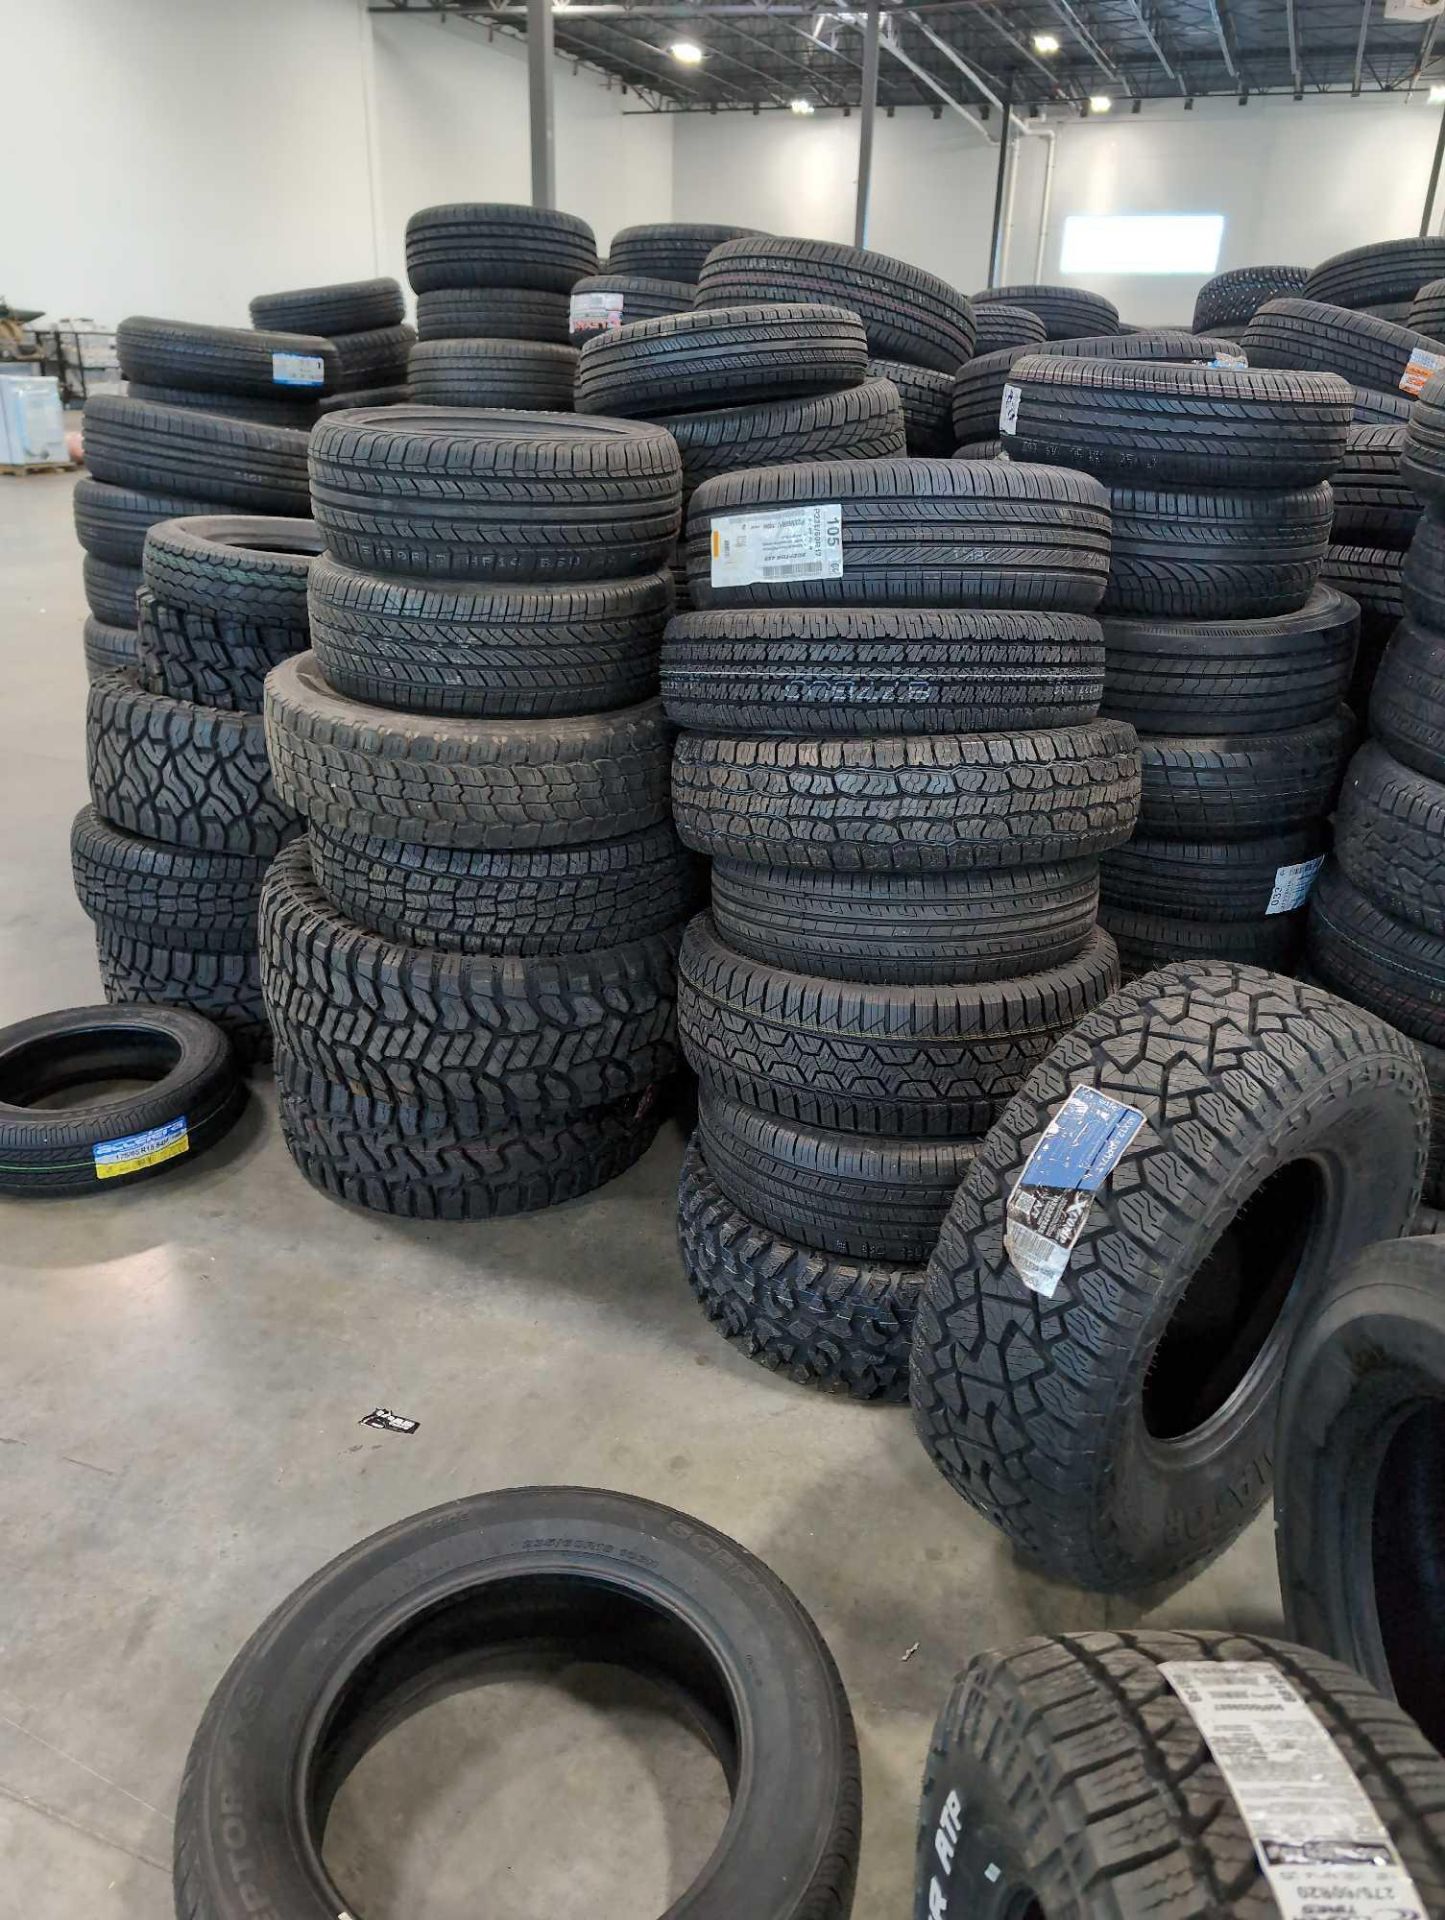 Approx 300 Tires - Image 24 of 48